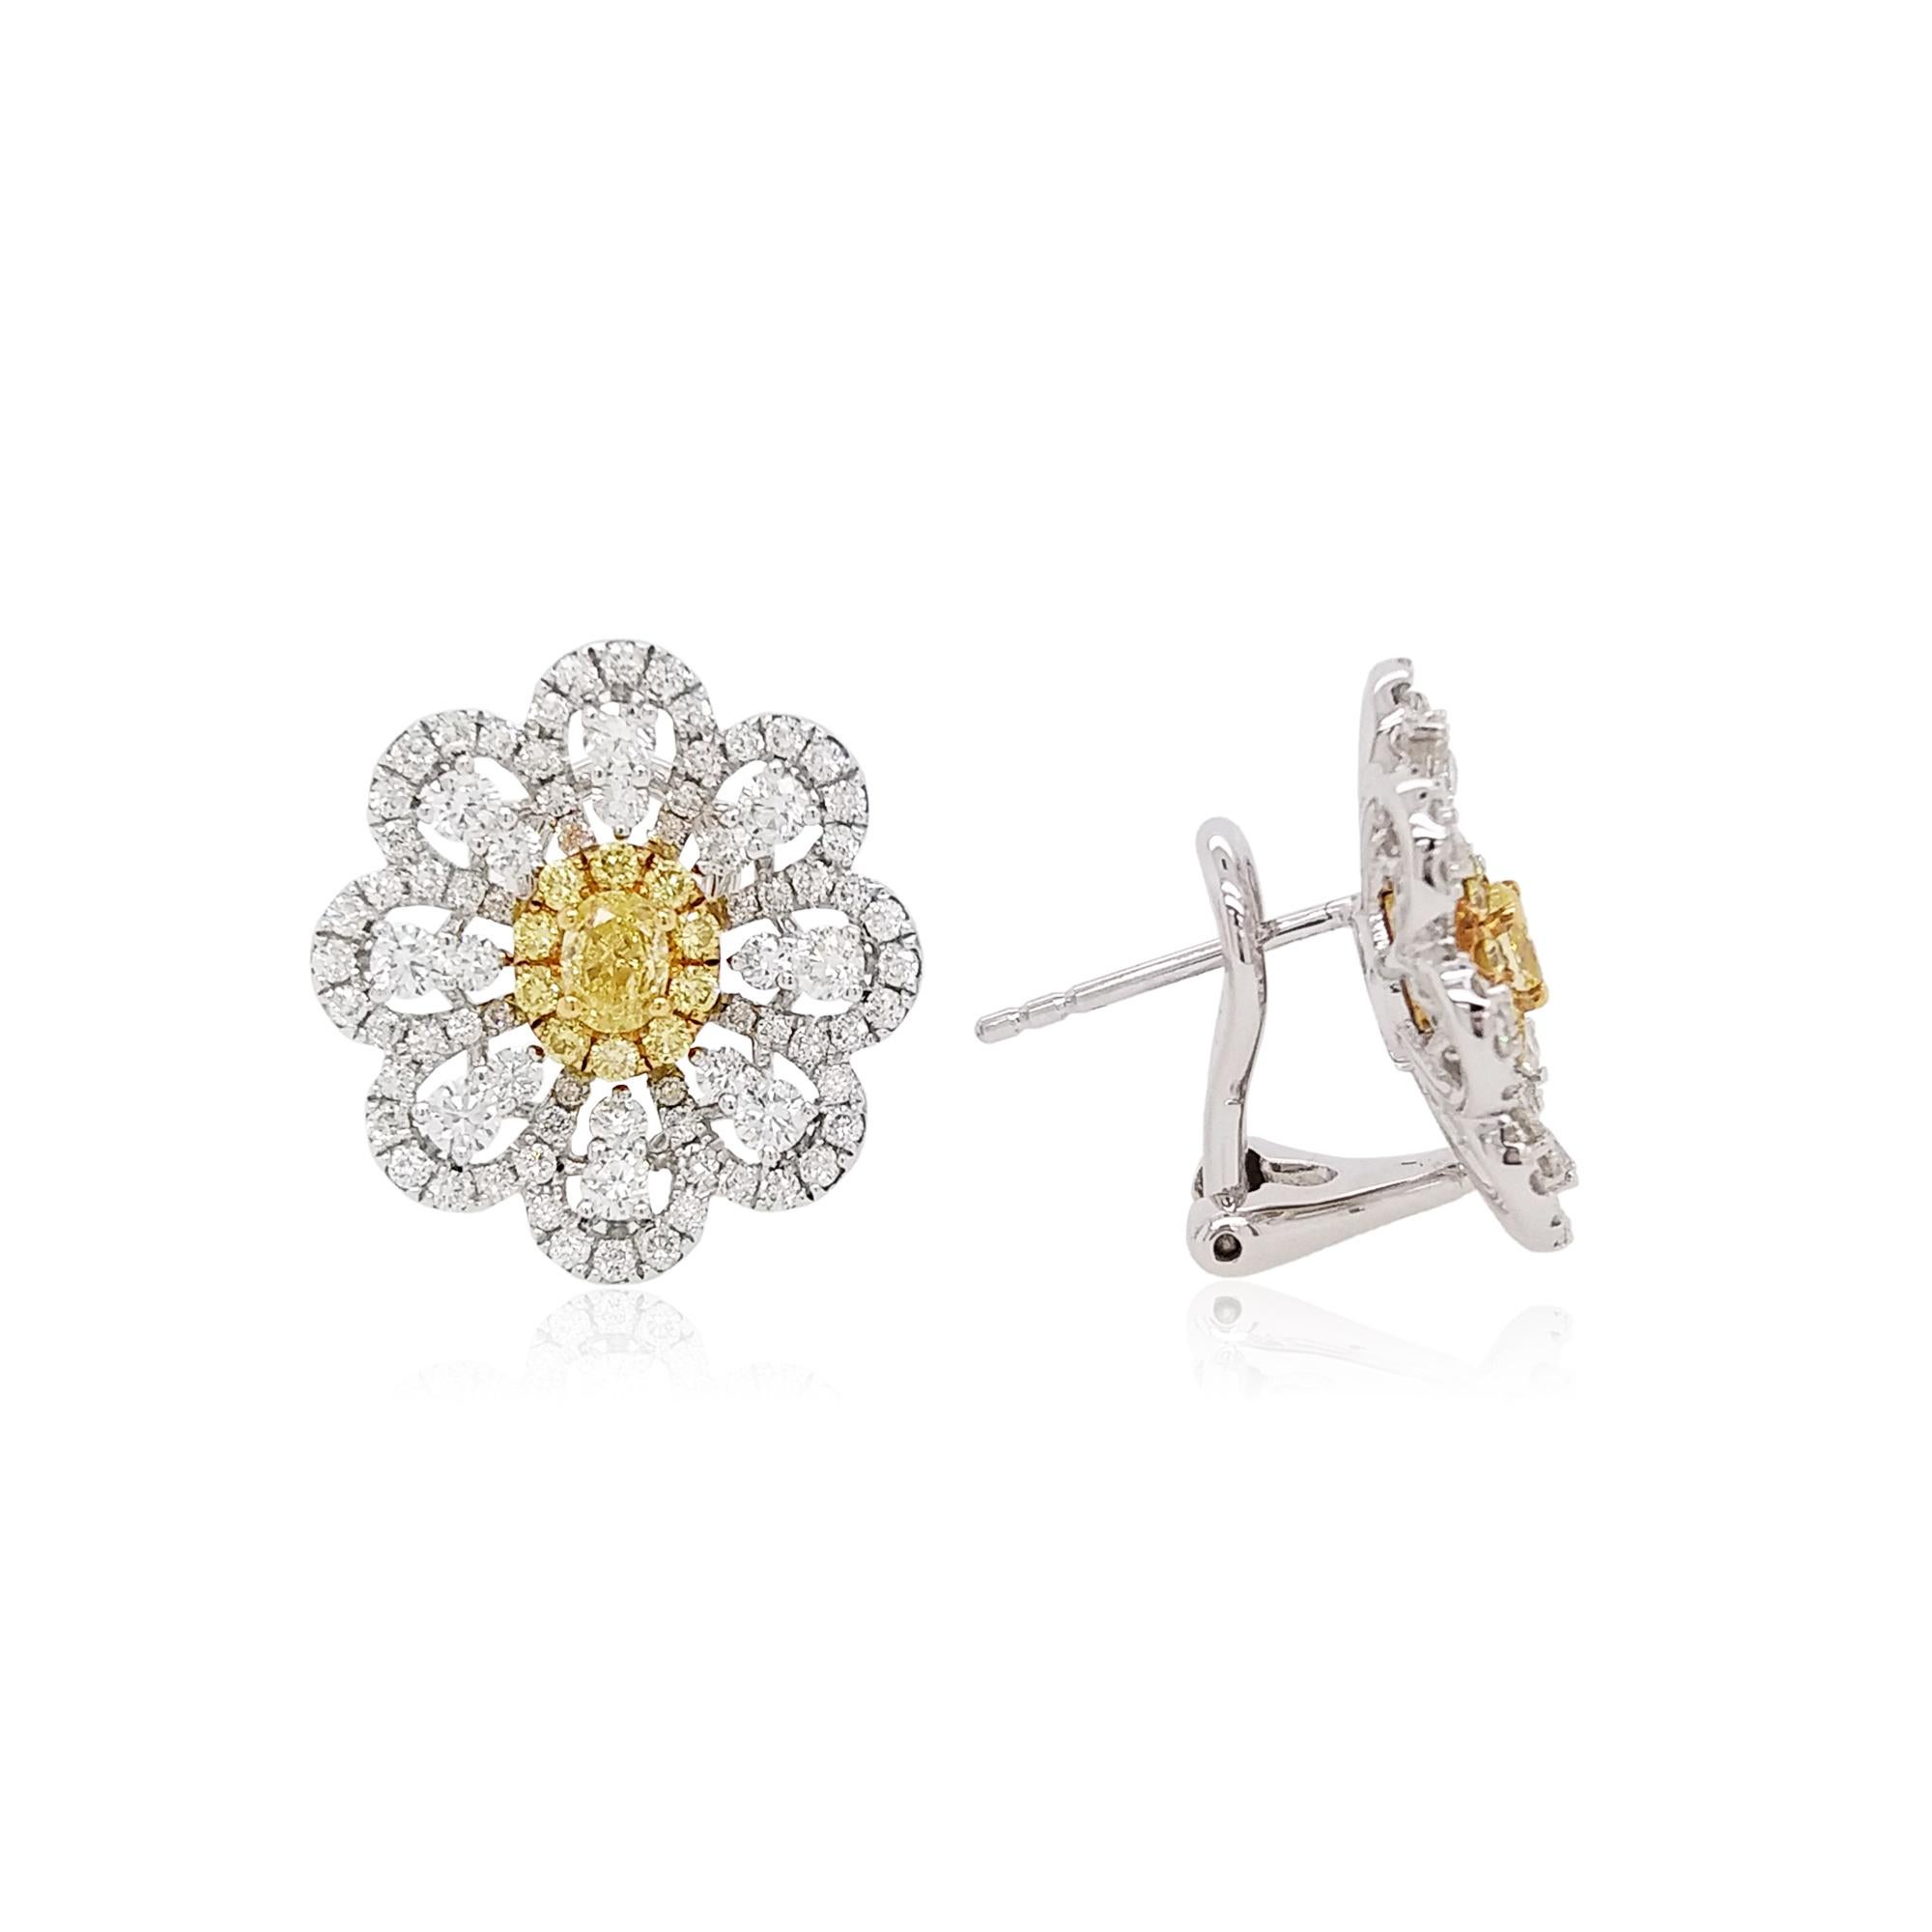 These floral K18 White gold earrings offer a subtle twist on a romantic design. Featuring Natural Fancy Intense Yellow Diamond at its centre, set amongst scintillating small yellow diamonds and sparkling white diamonds petals. These pretty earrings